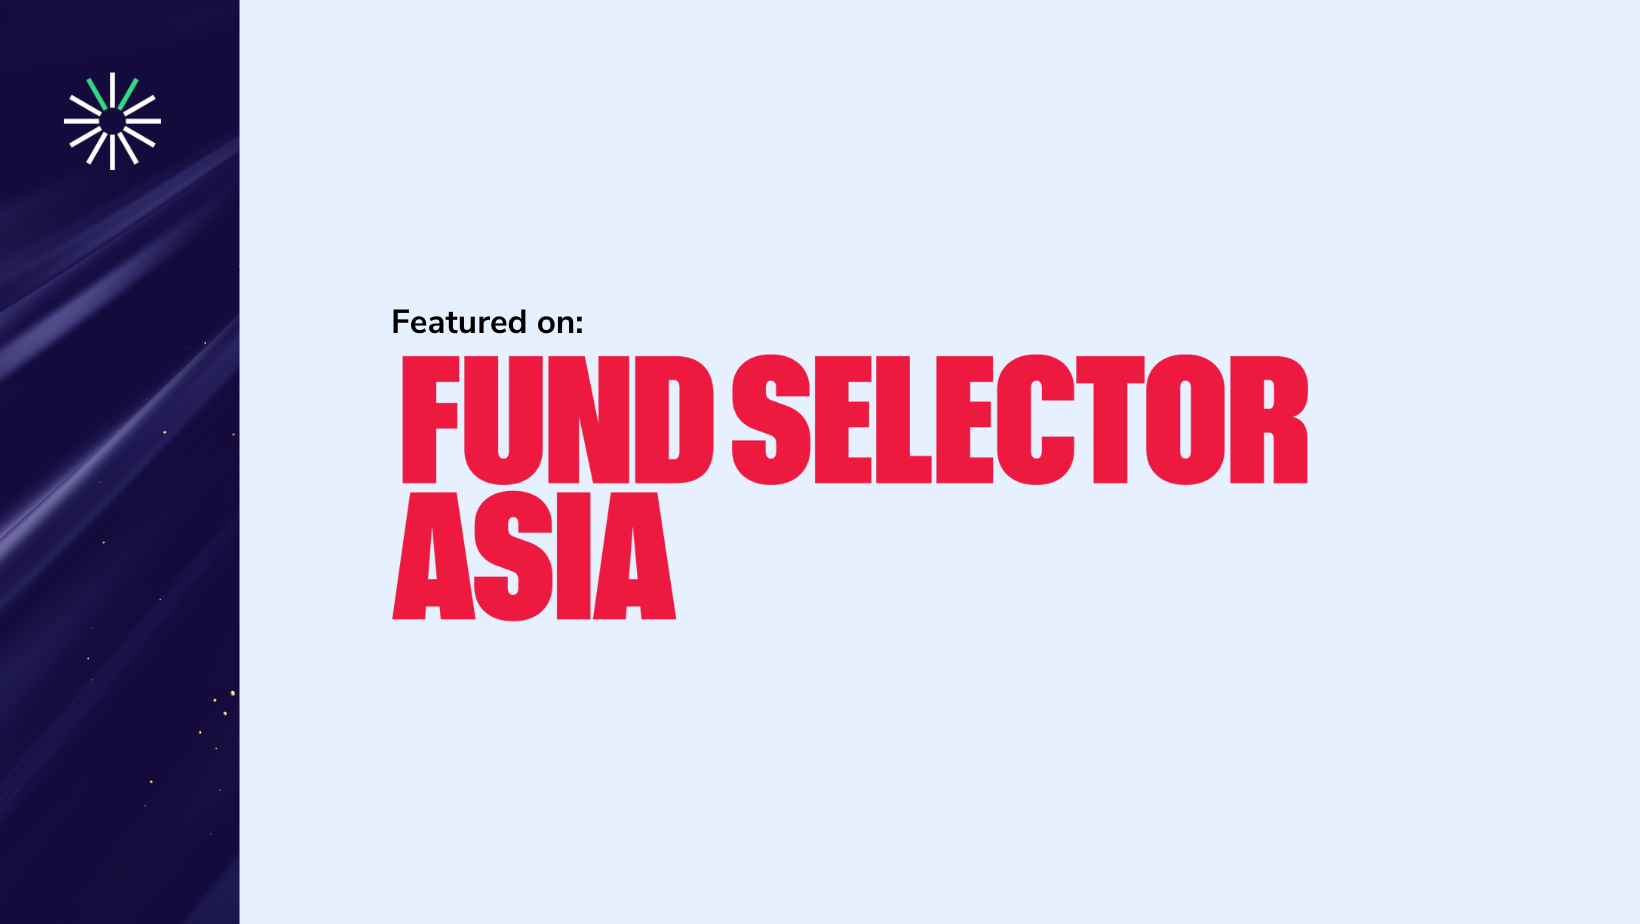 Fund Selector Asia - Paragon CM and RealVantage partner to launch private equity fund